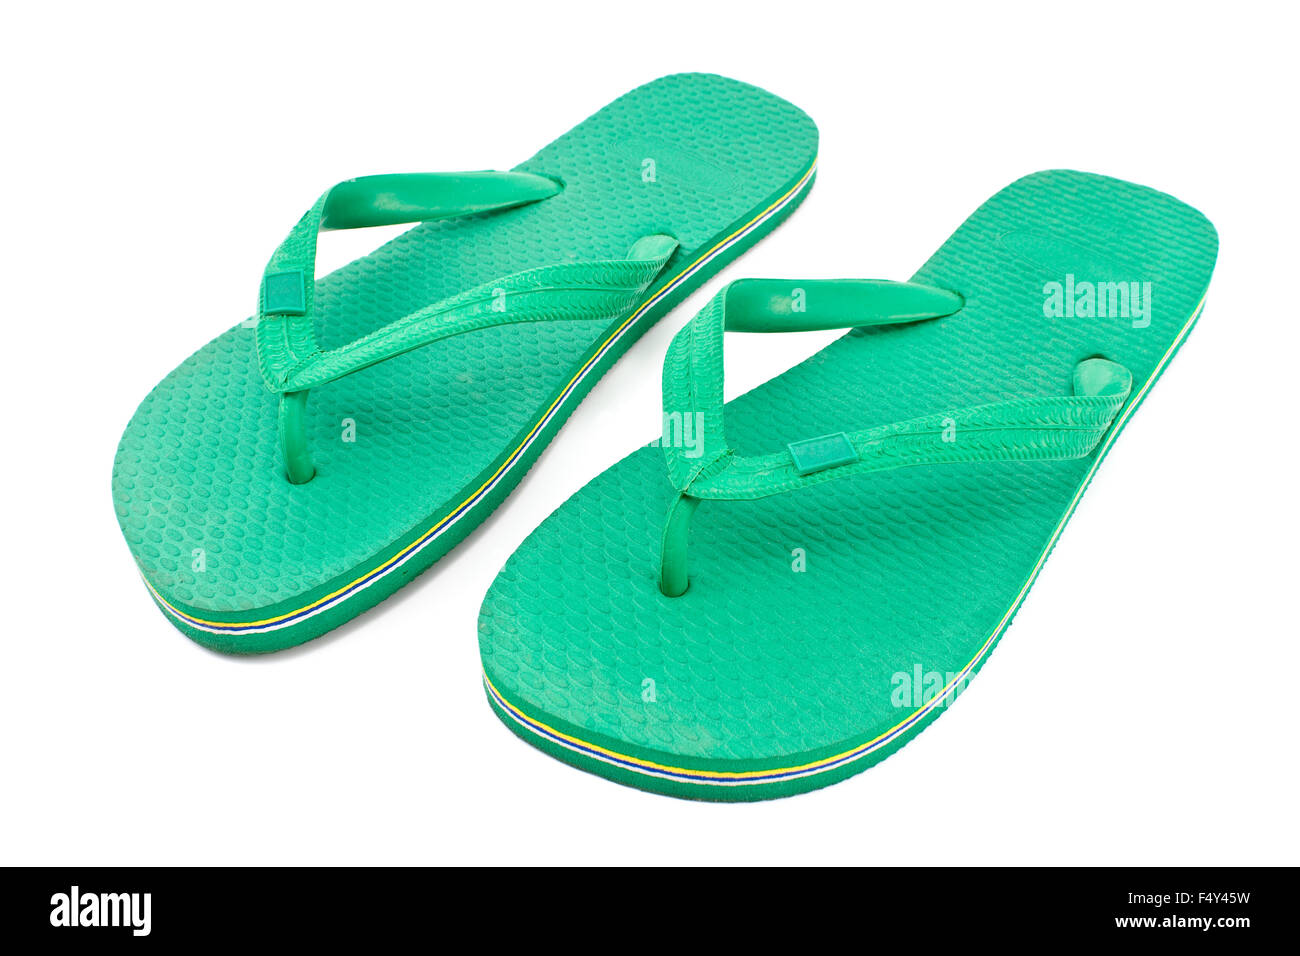 Pair of green rubber flip flop sandals isolated on white Stock Photo